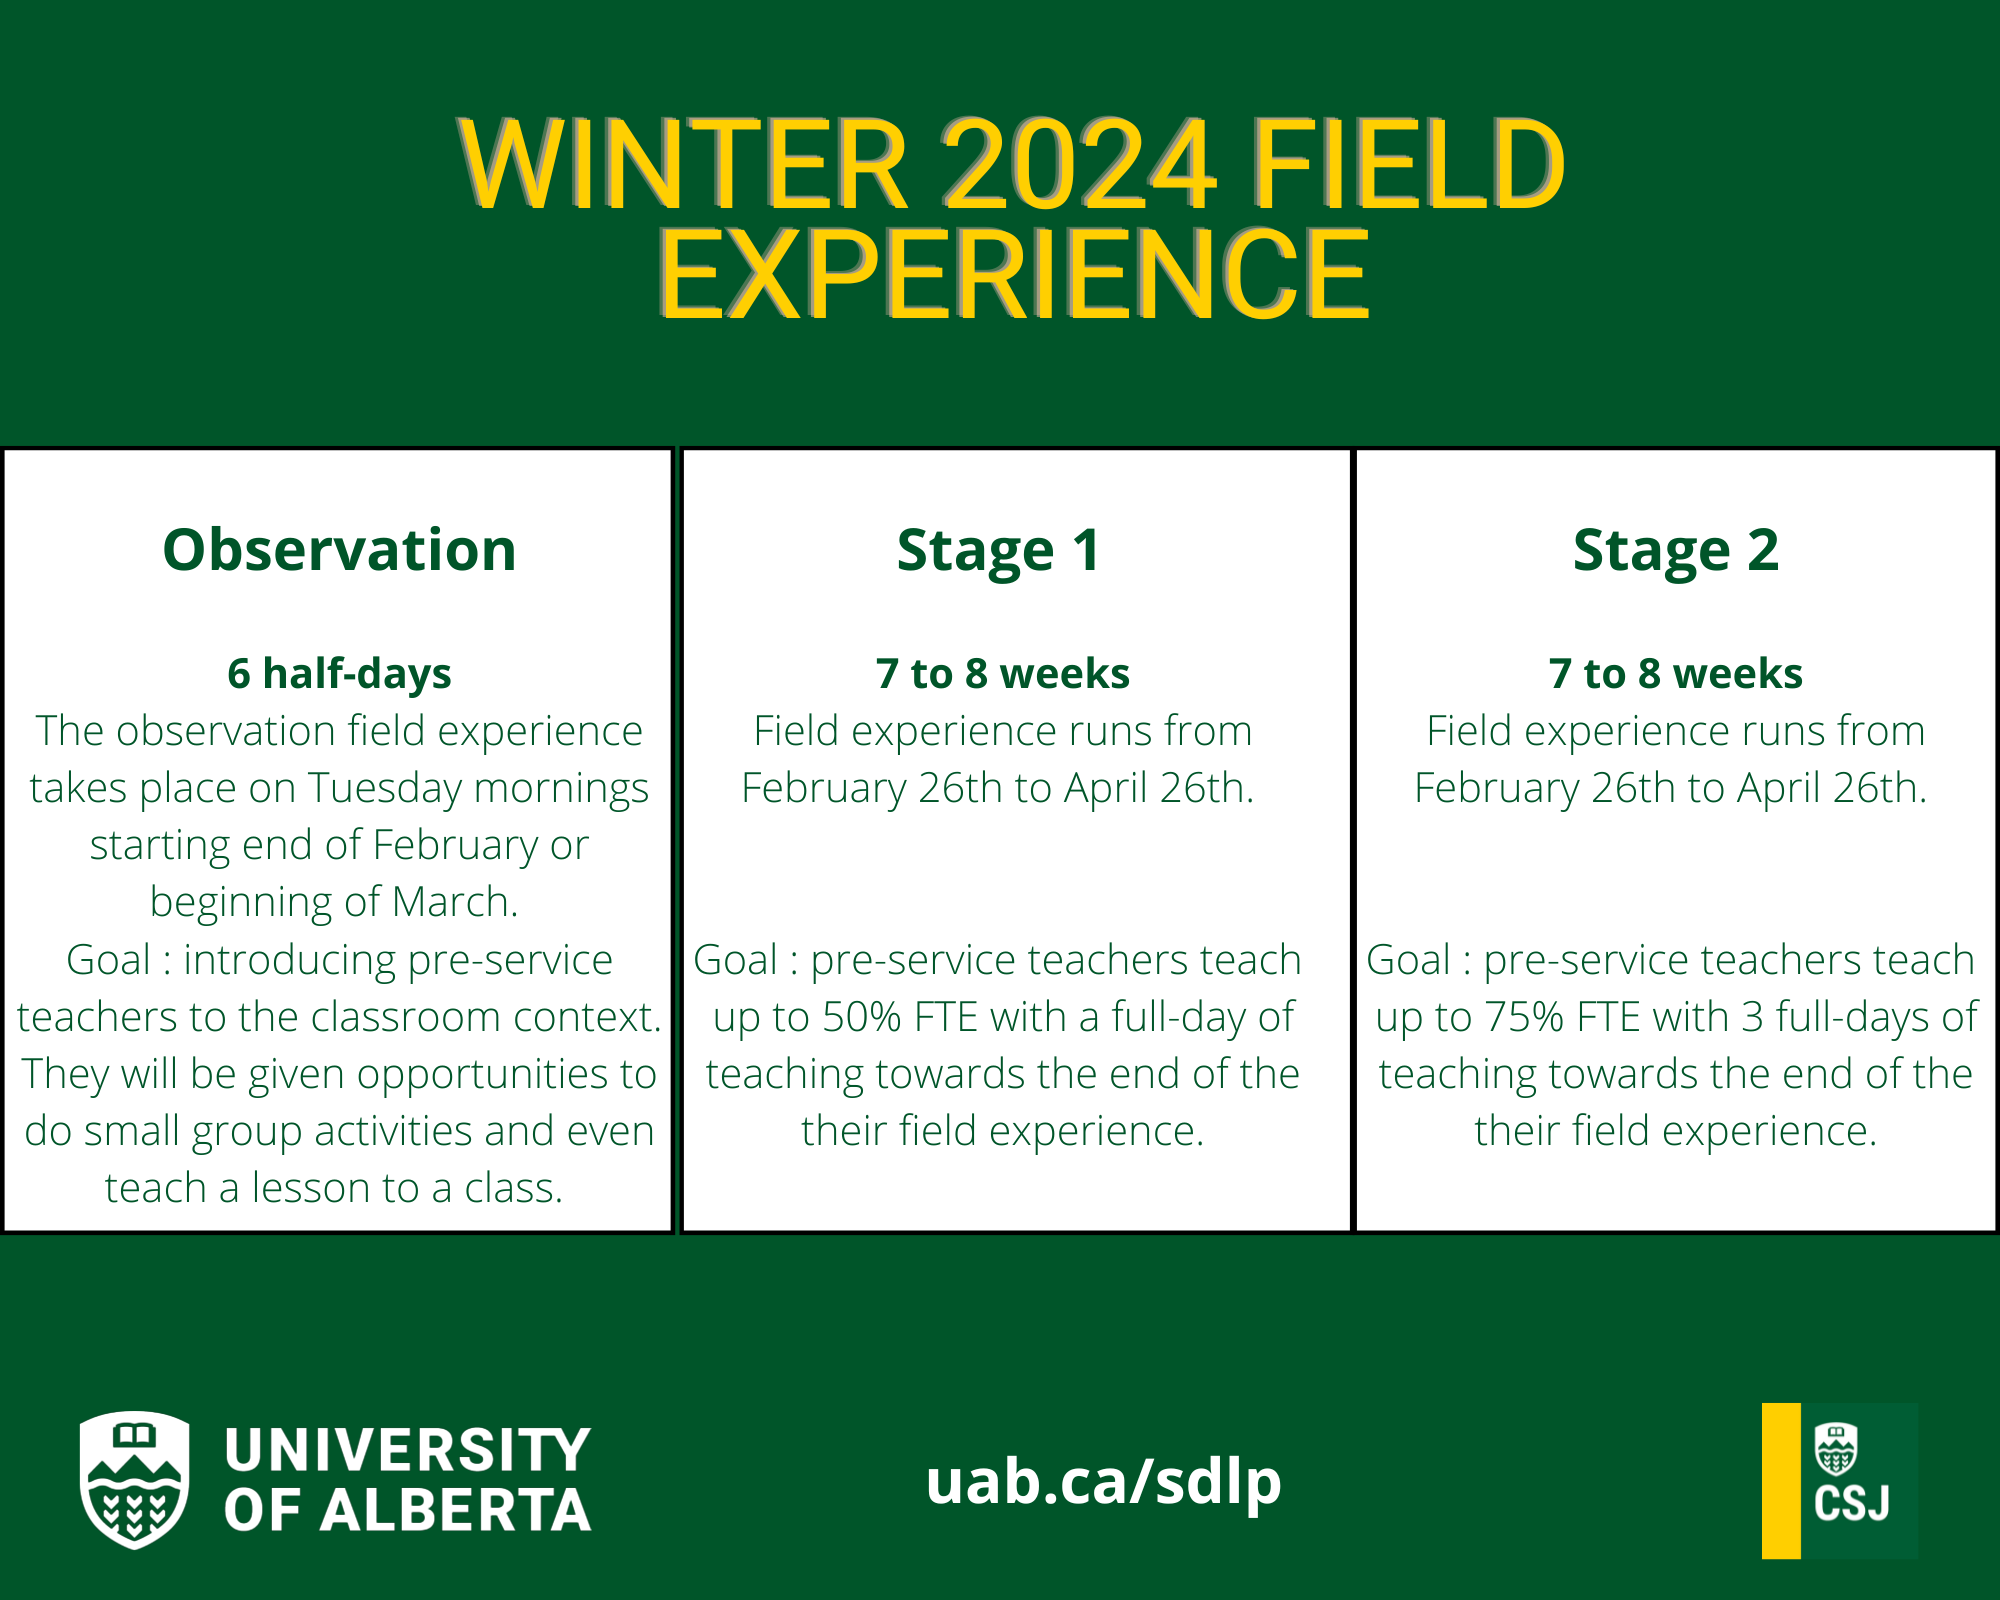 Dates for Winter 2024 Field Experiences